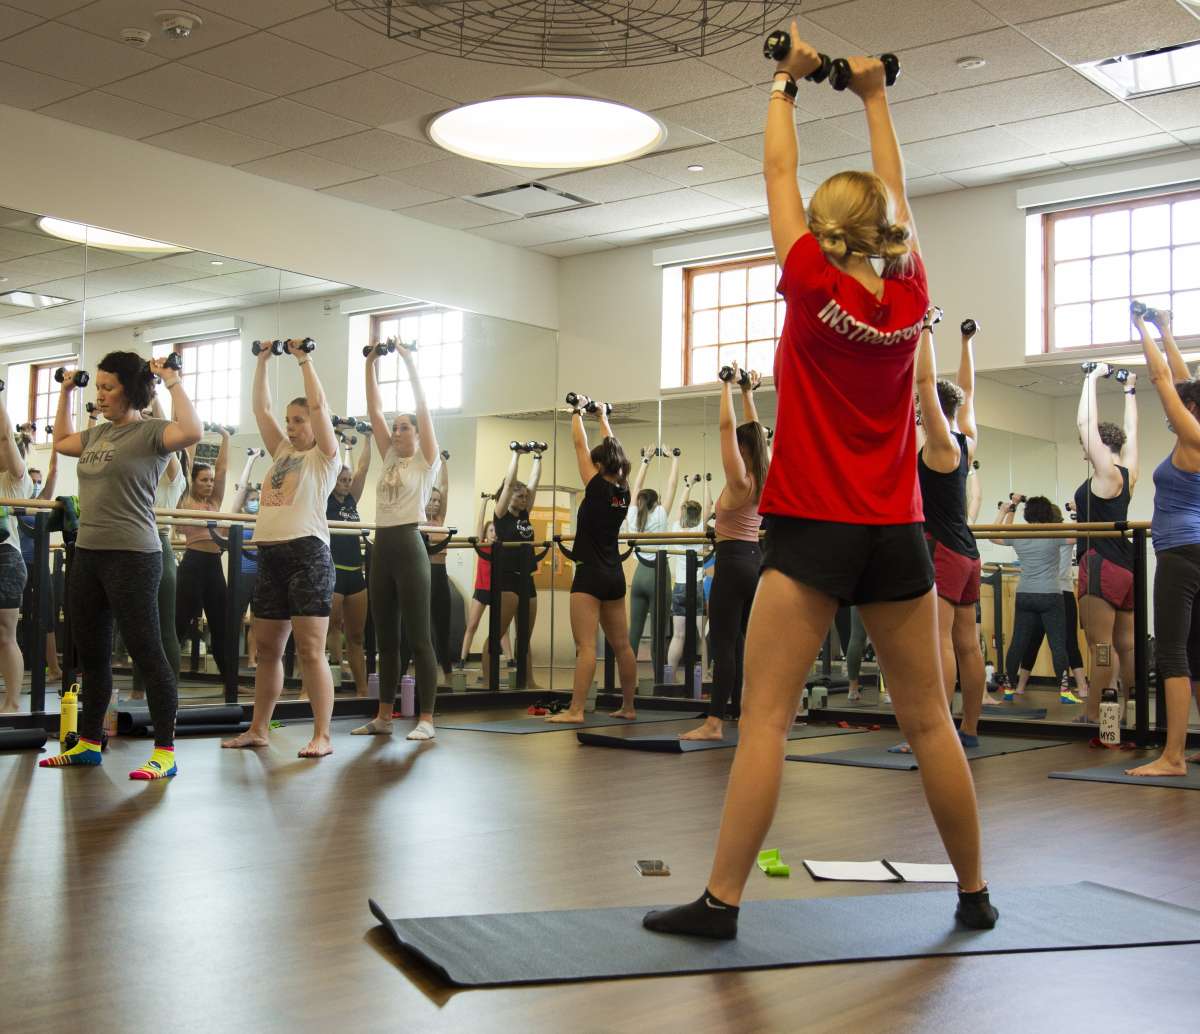 Group of people in a fitness class lifting weights.